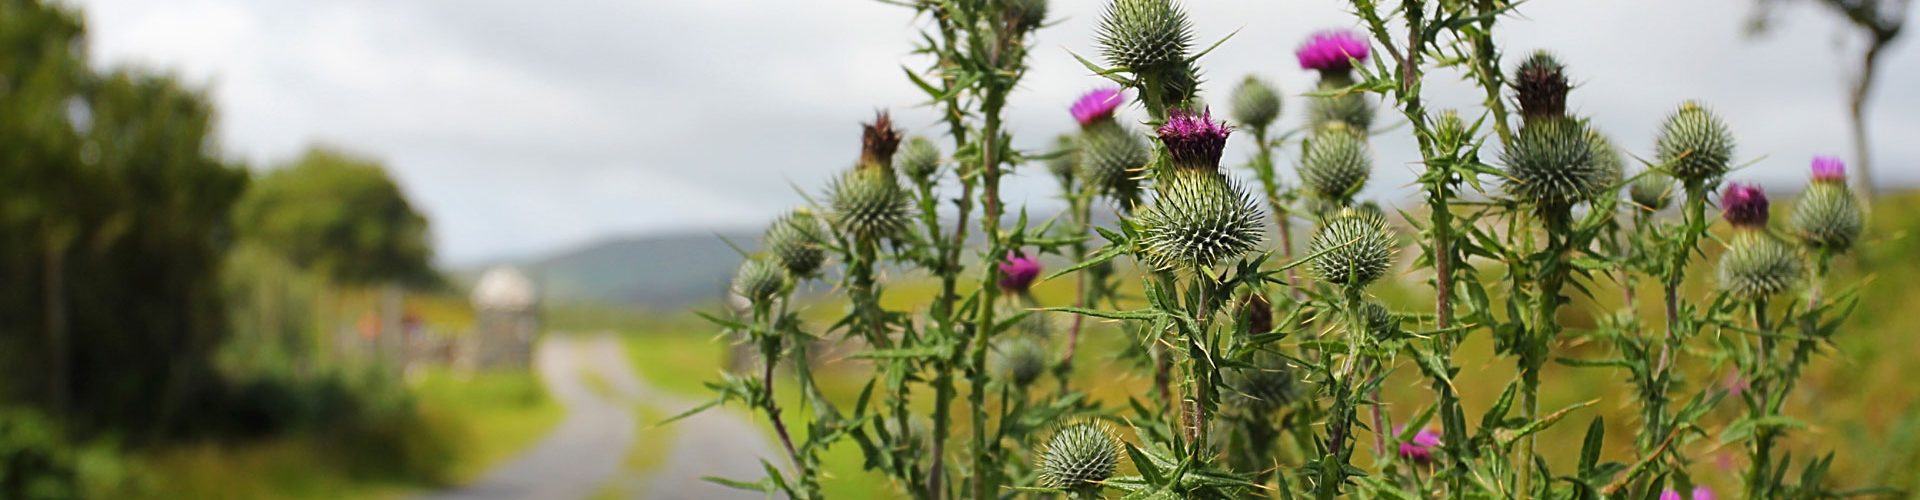 Thistles growing by the side of the road on Islay